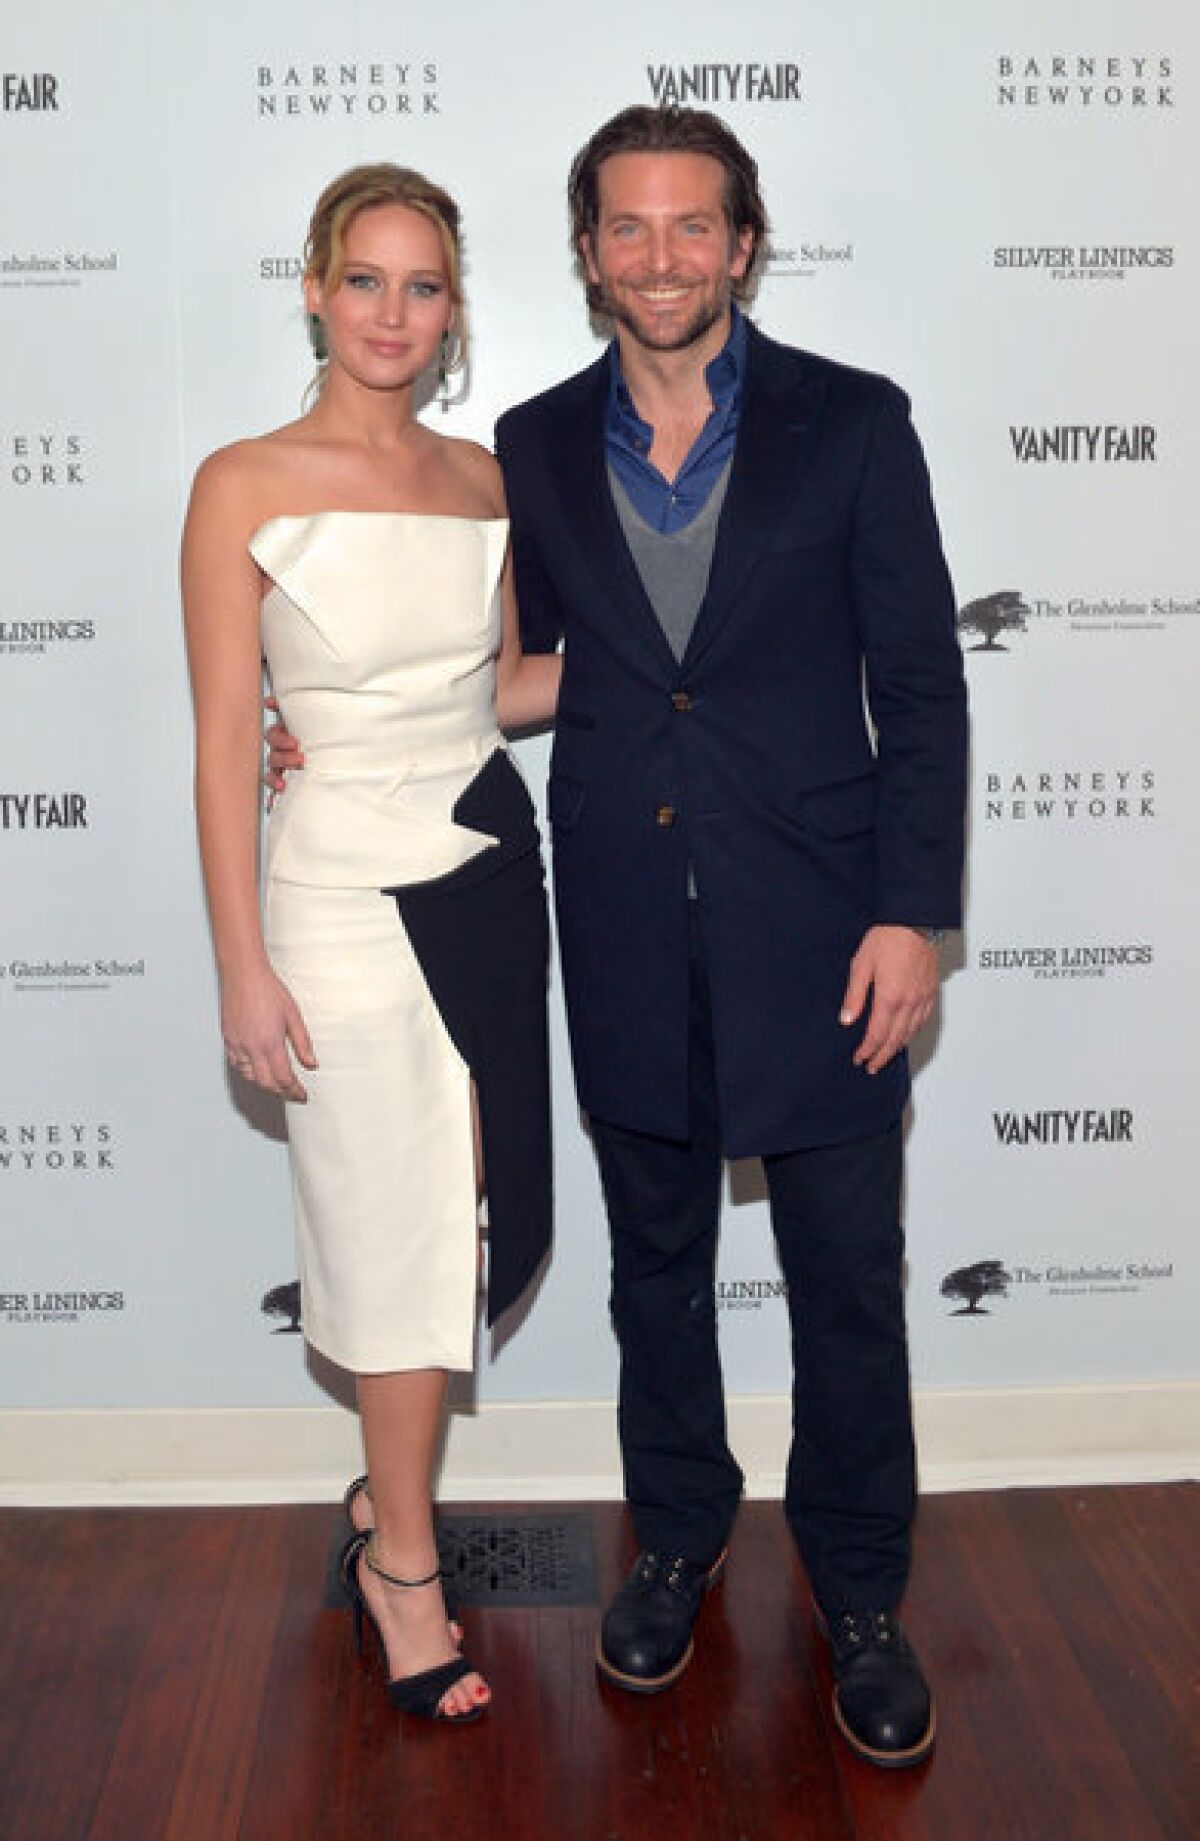 Jennifer Lawrence and Bradley Cooper attend the Vanity Fair, Barneys New York and Weinstein Co. celebration of "Silver Linings Playbook" in support of the Glenholme School on Wednesday in Los Angeles.